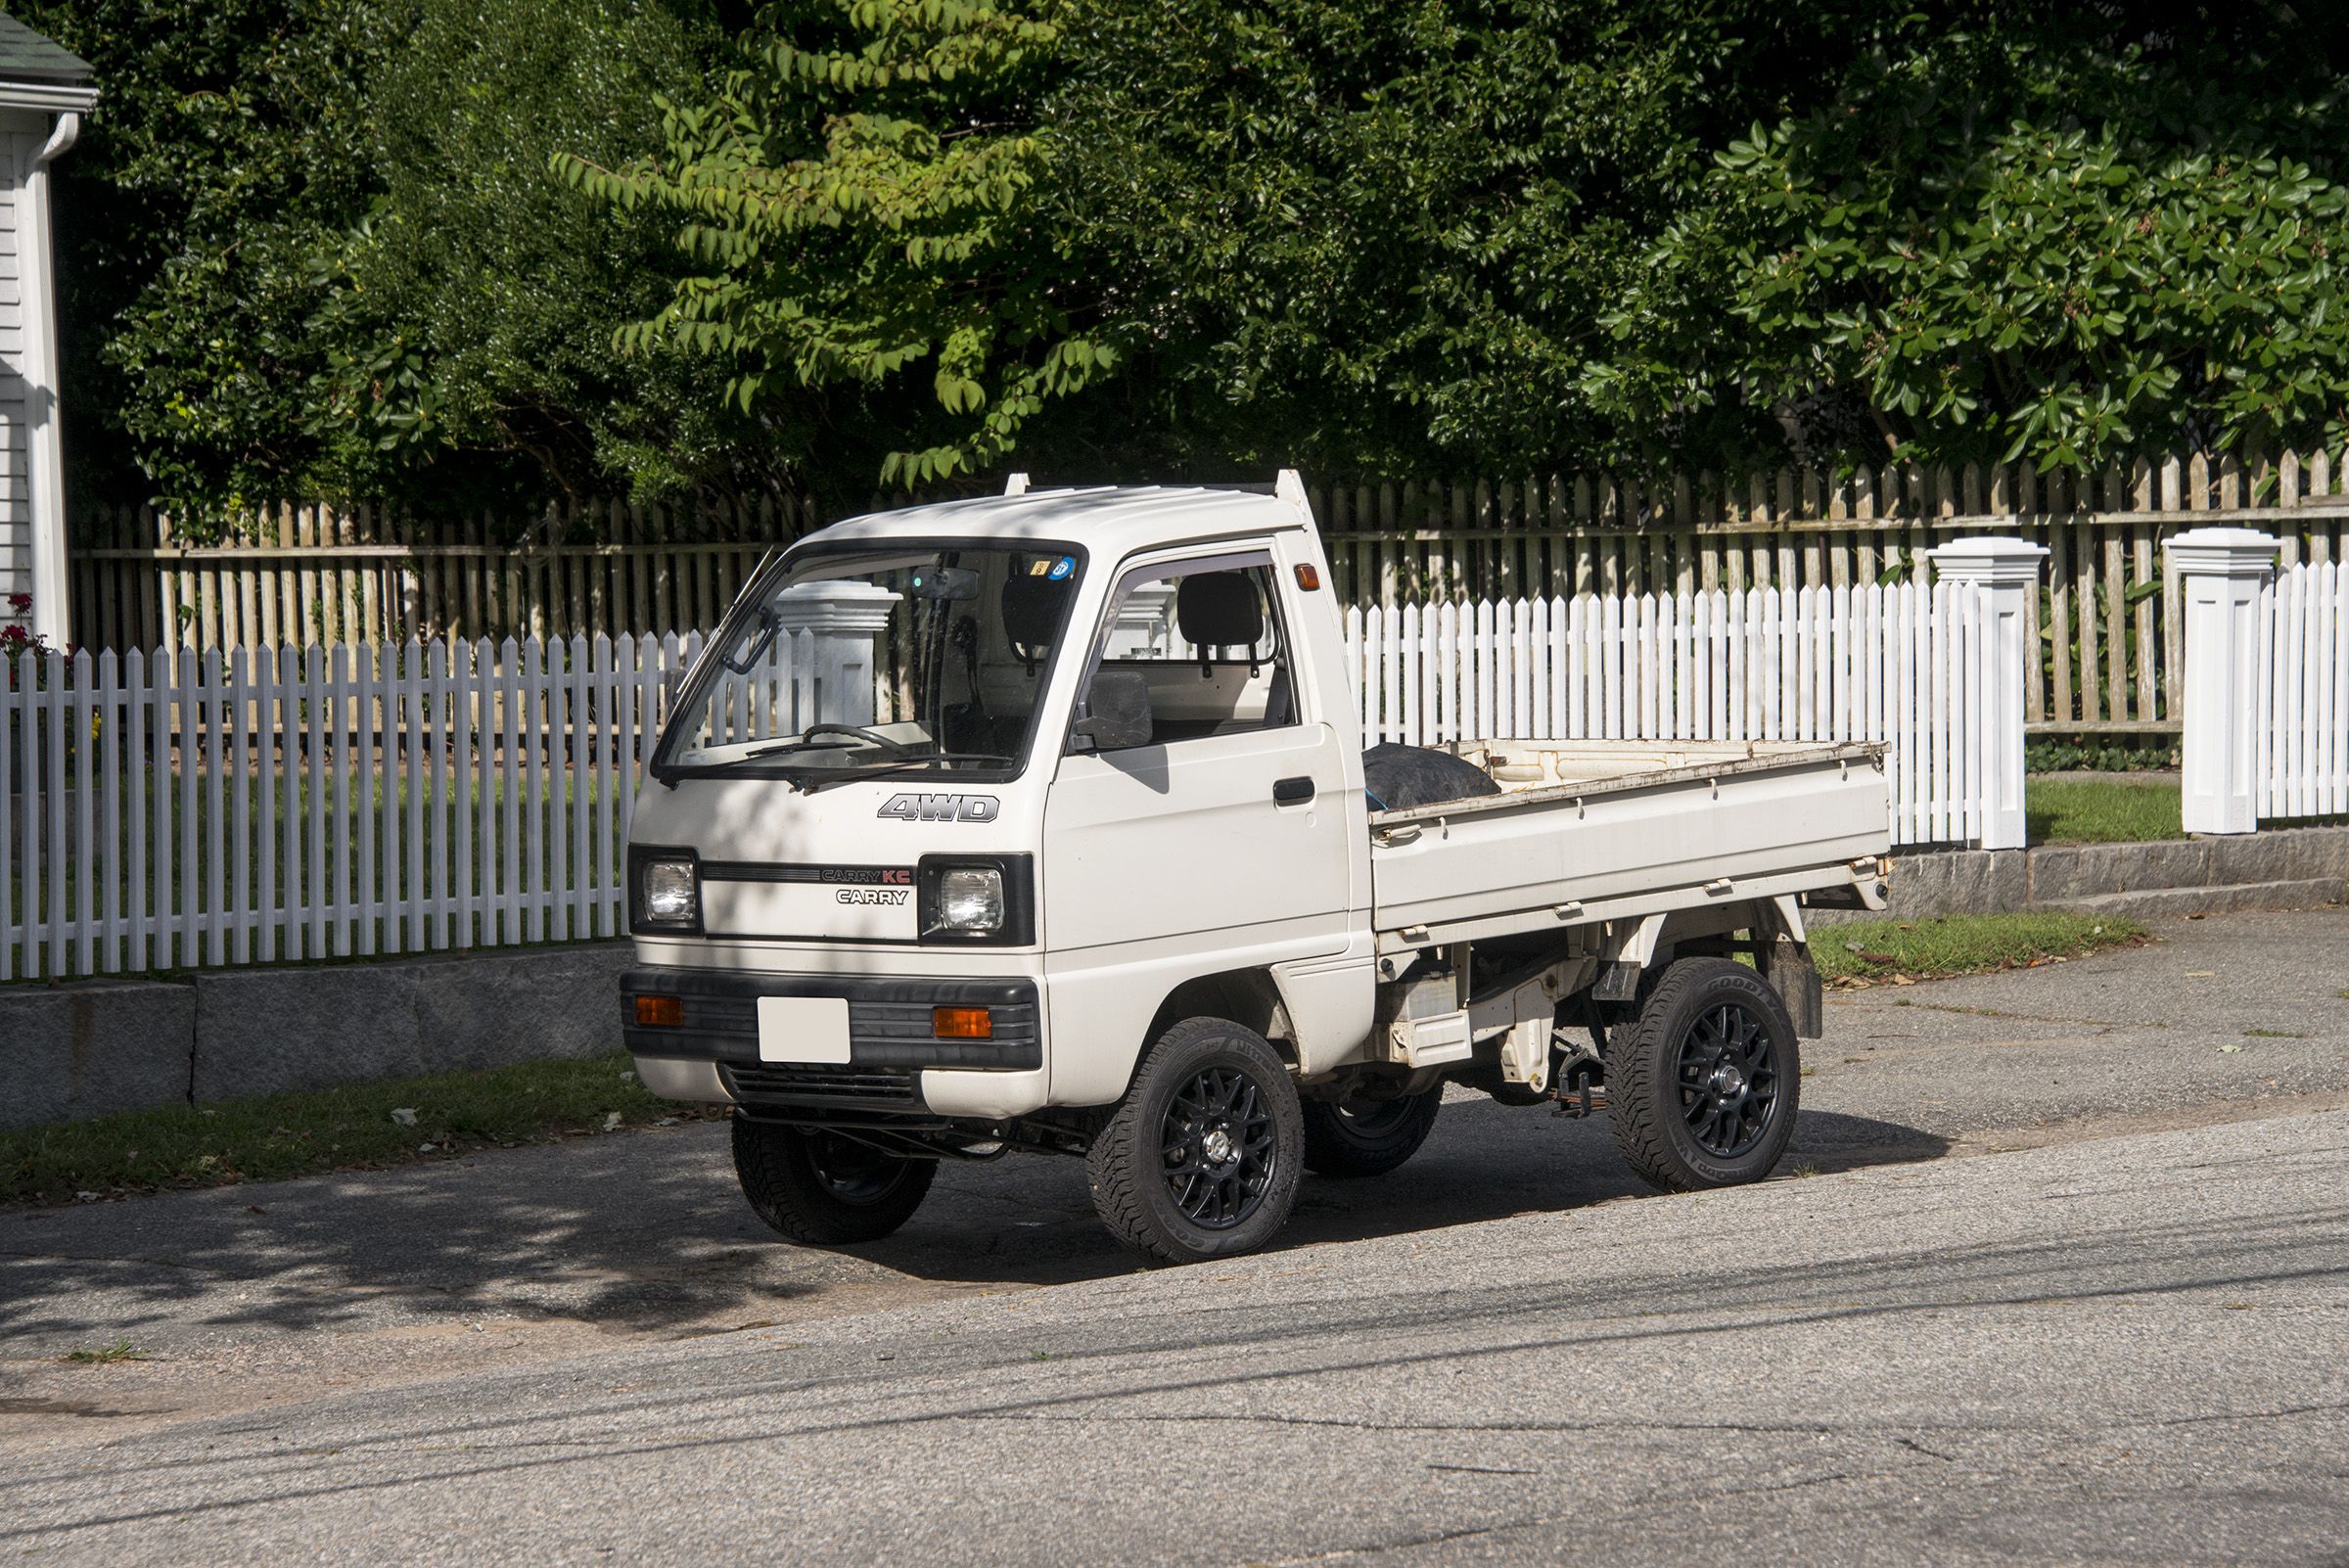 Suzuki wanted to call the Samurai a cargo truck and accidentally created a  new way around the chicken tax